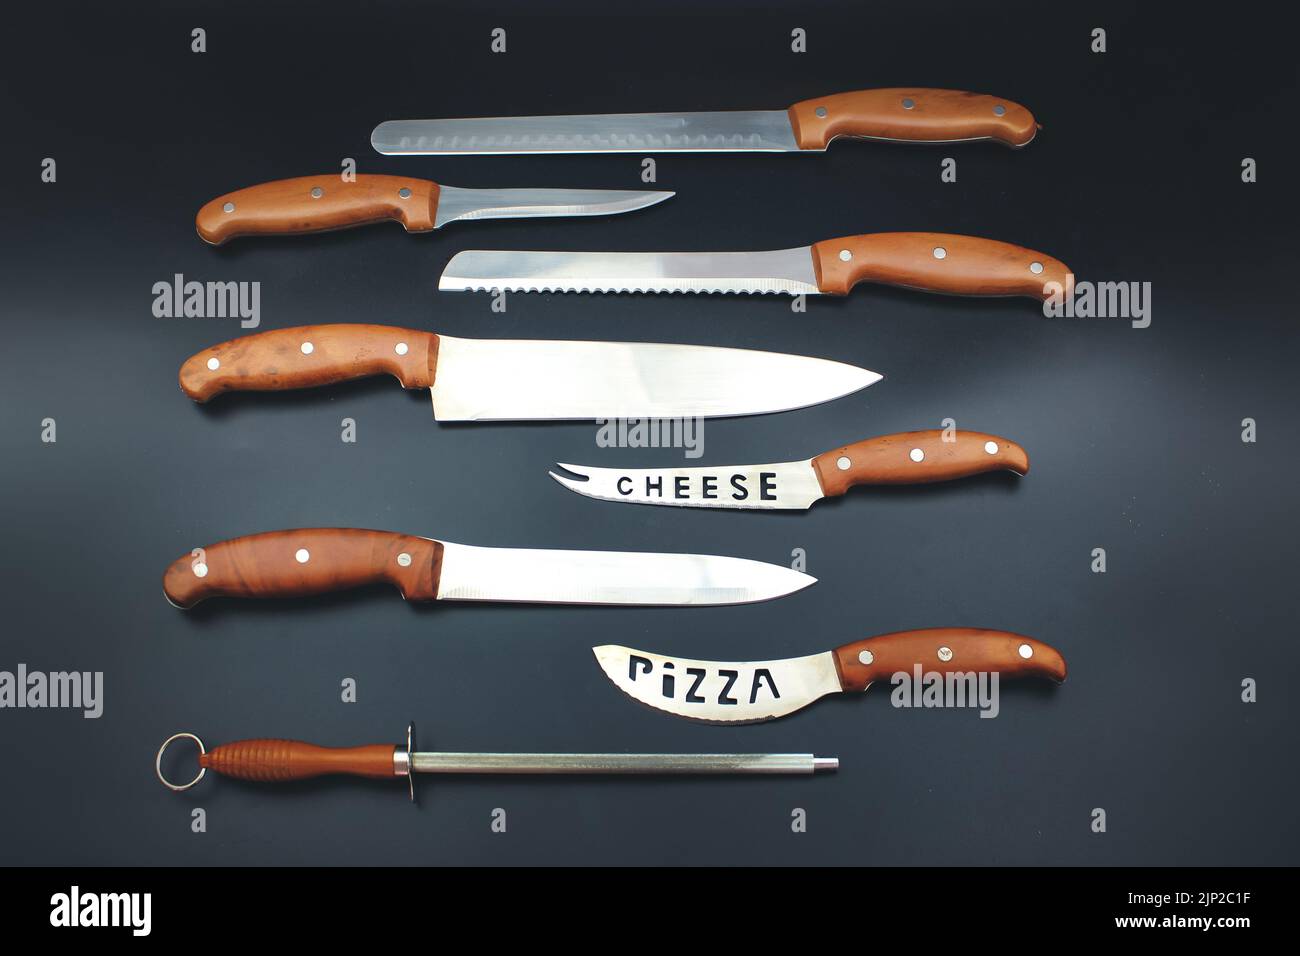 Quality Kitchen Knives. Set of various kitchen knives arranged on black, top view. Stock Photo